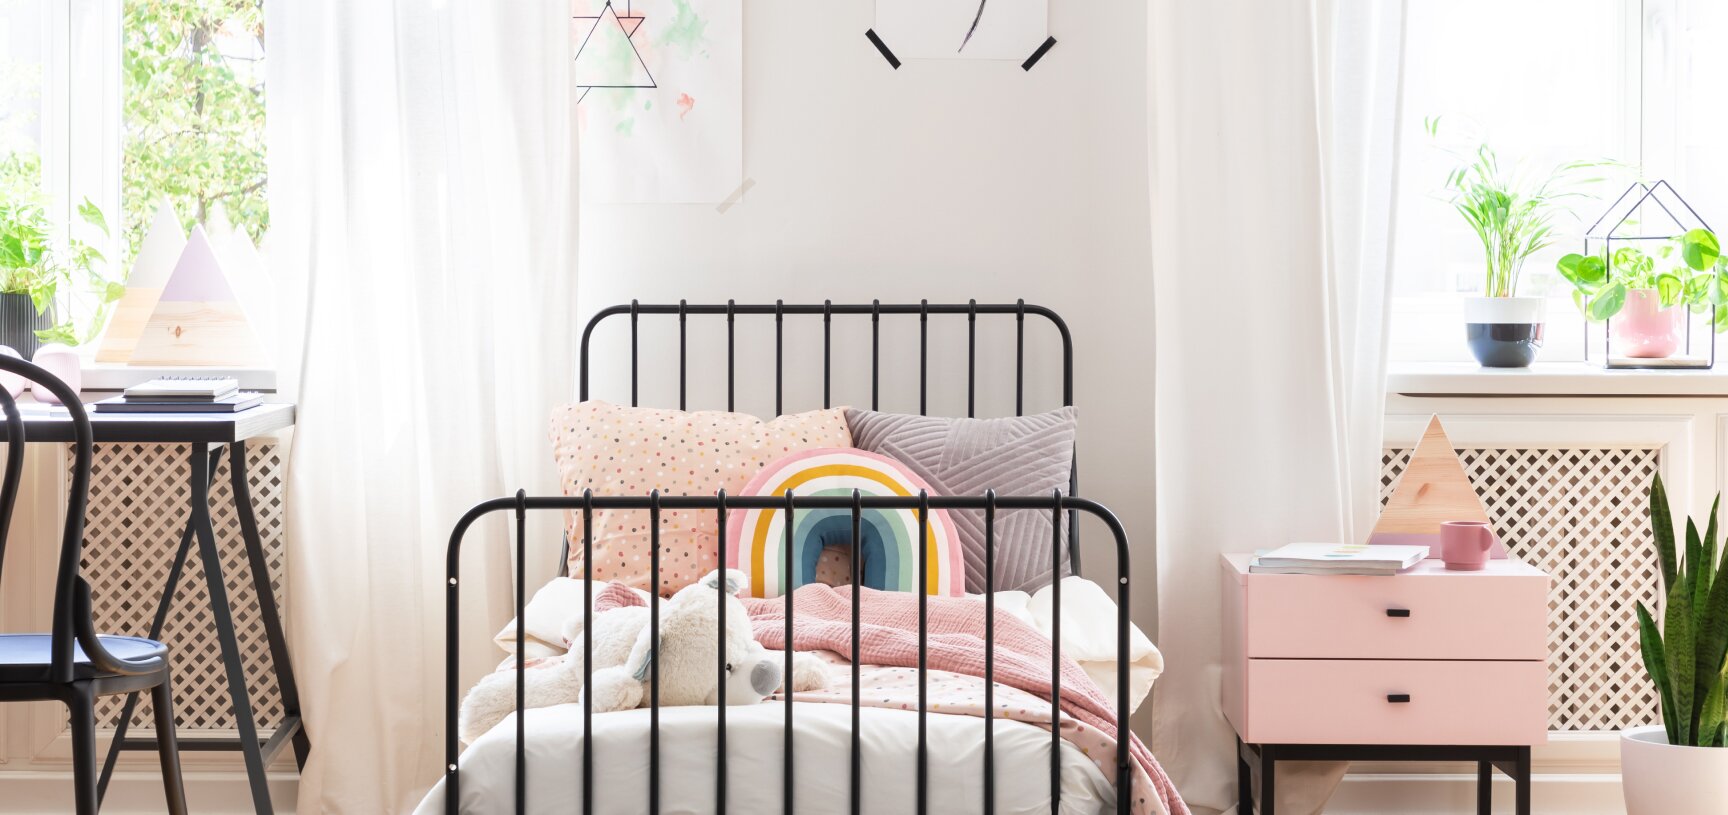 4 Kids Room Ideas That Complement Your Grown-Up Style 